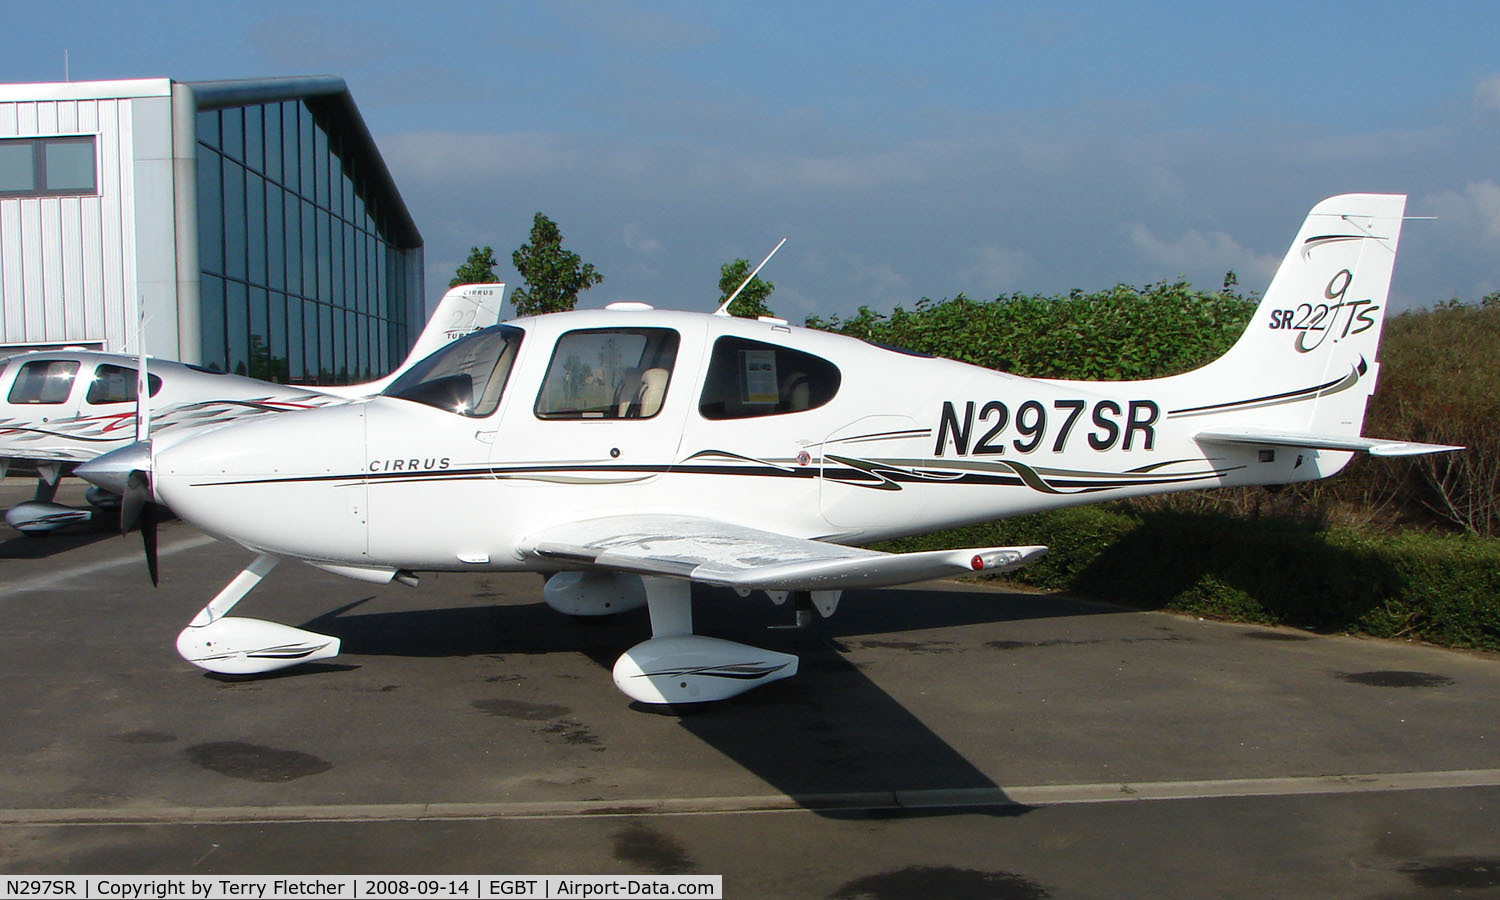 N297SR, 2006 Cirrus SR22 GTS C/N 2058, With the Cirrus agents at Turweston on 2008 Vintage and Classic Day